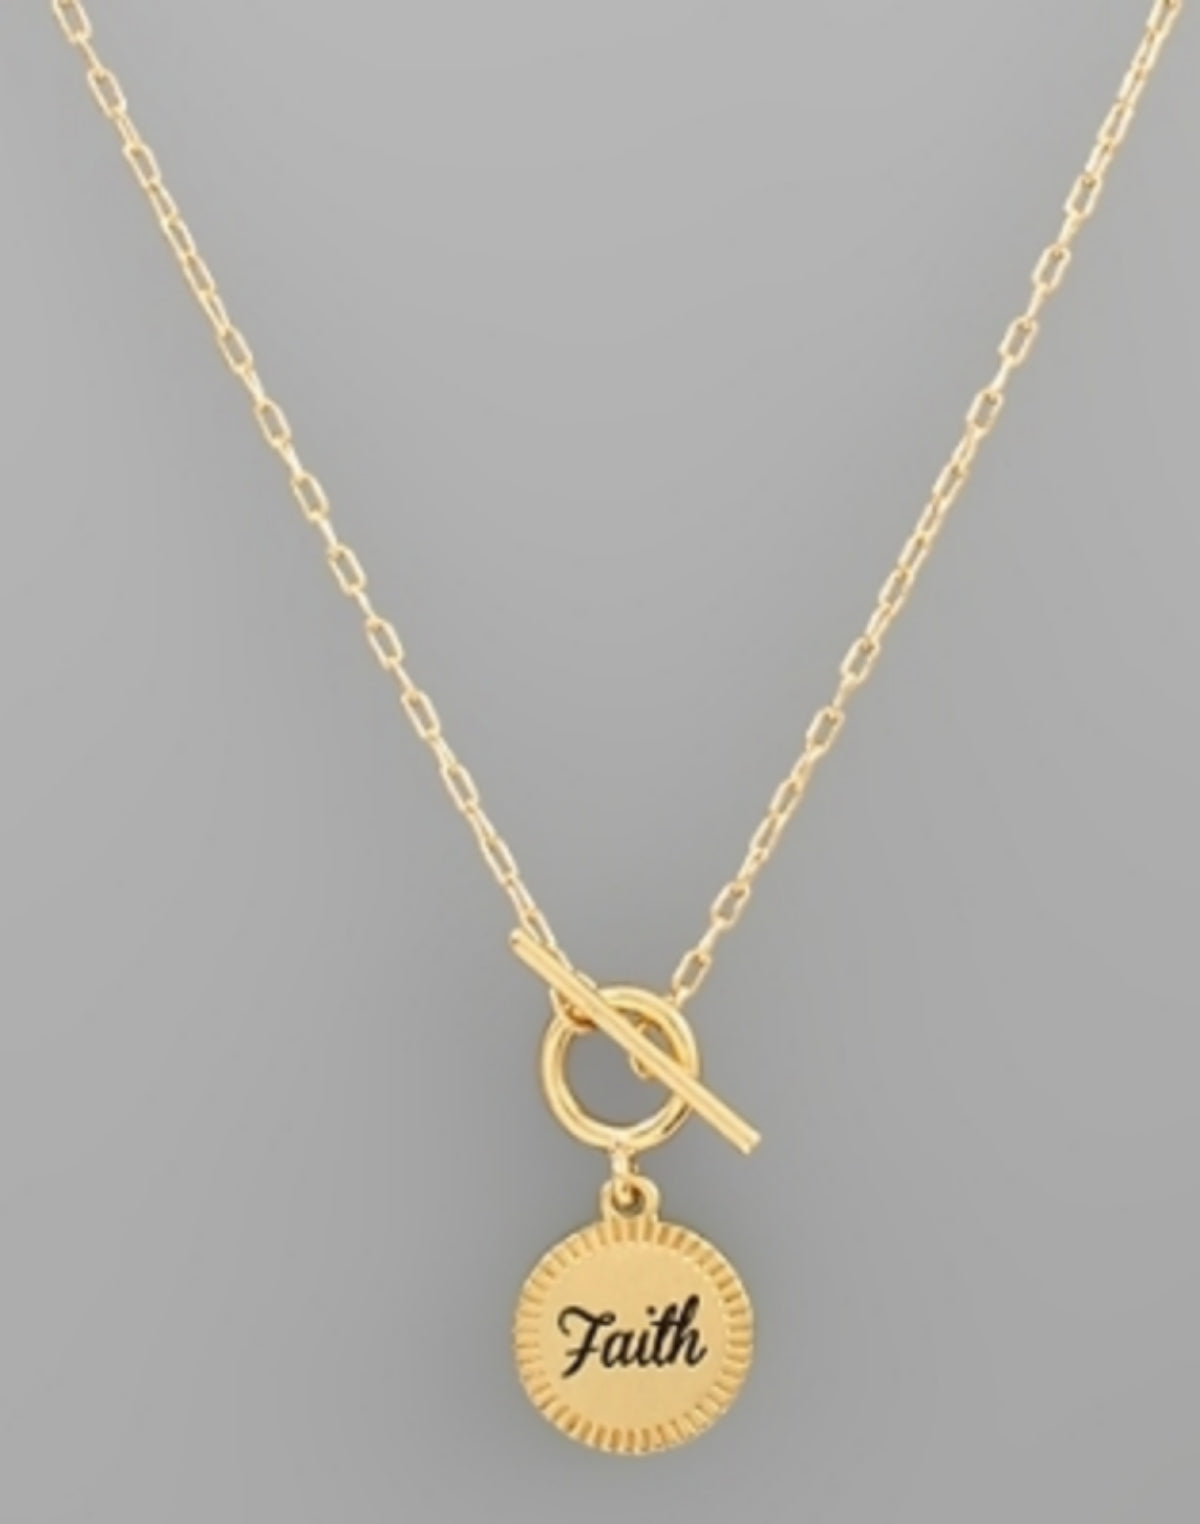 Faith Disk Necklace-Gold - Southern Grace Creations